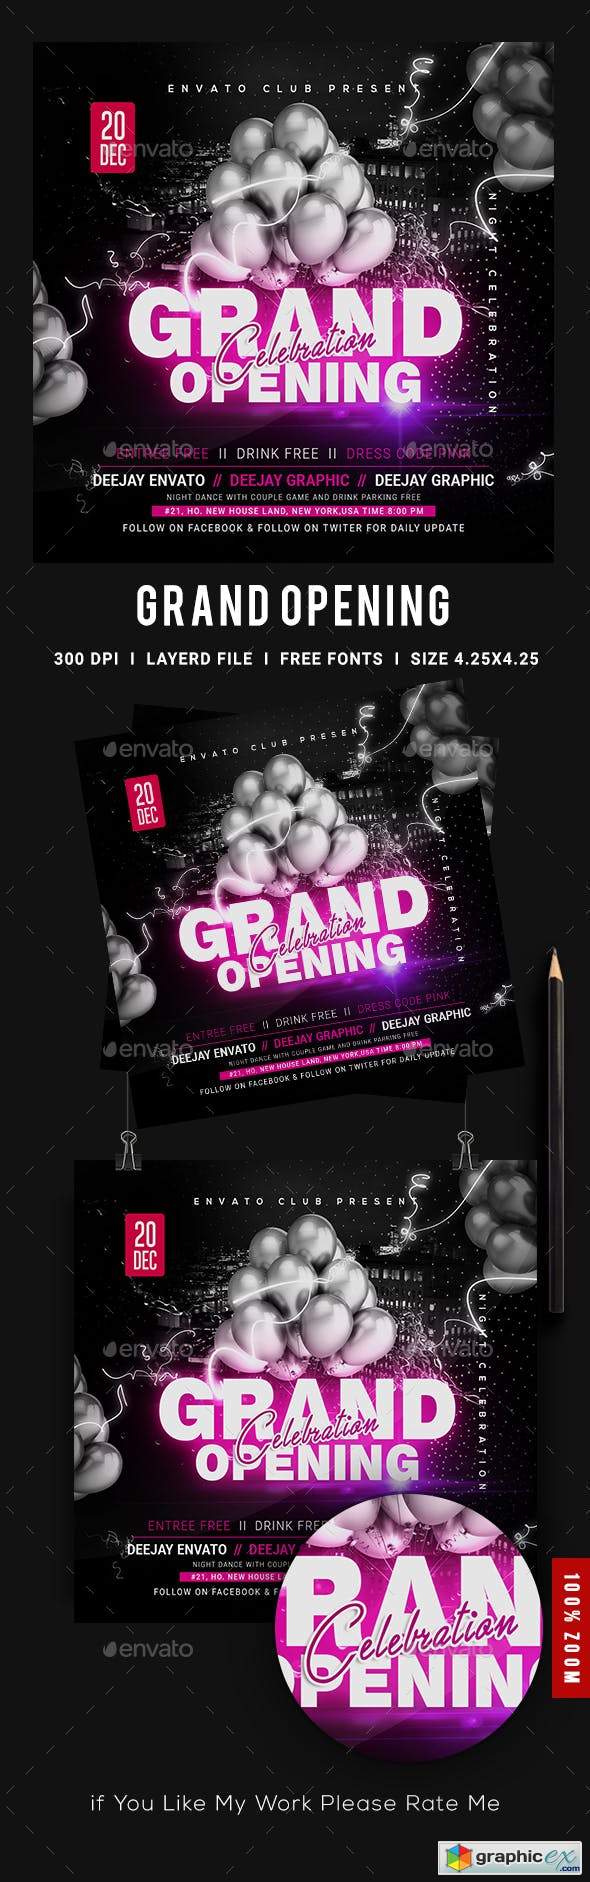 Grand Opening Flyer 23563264